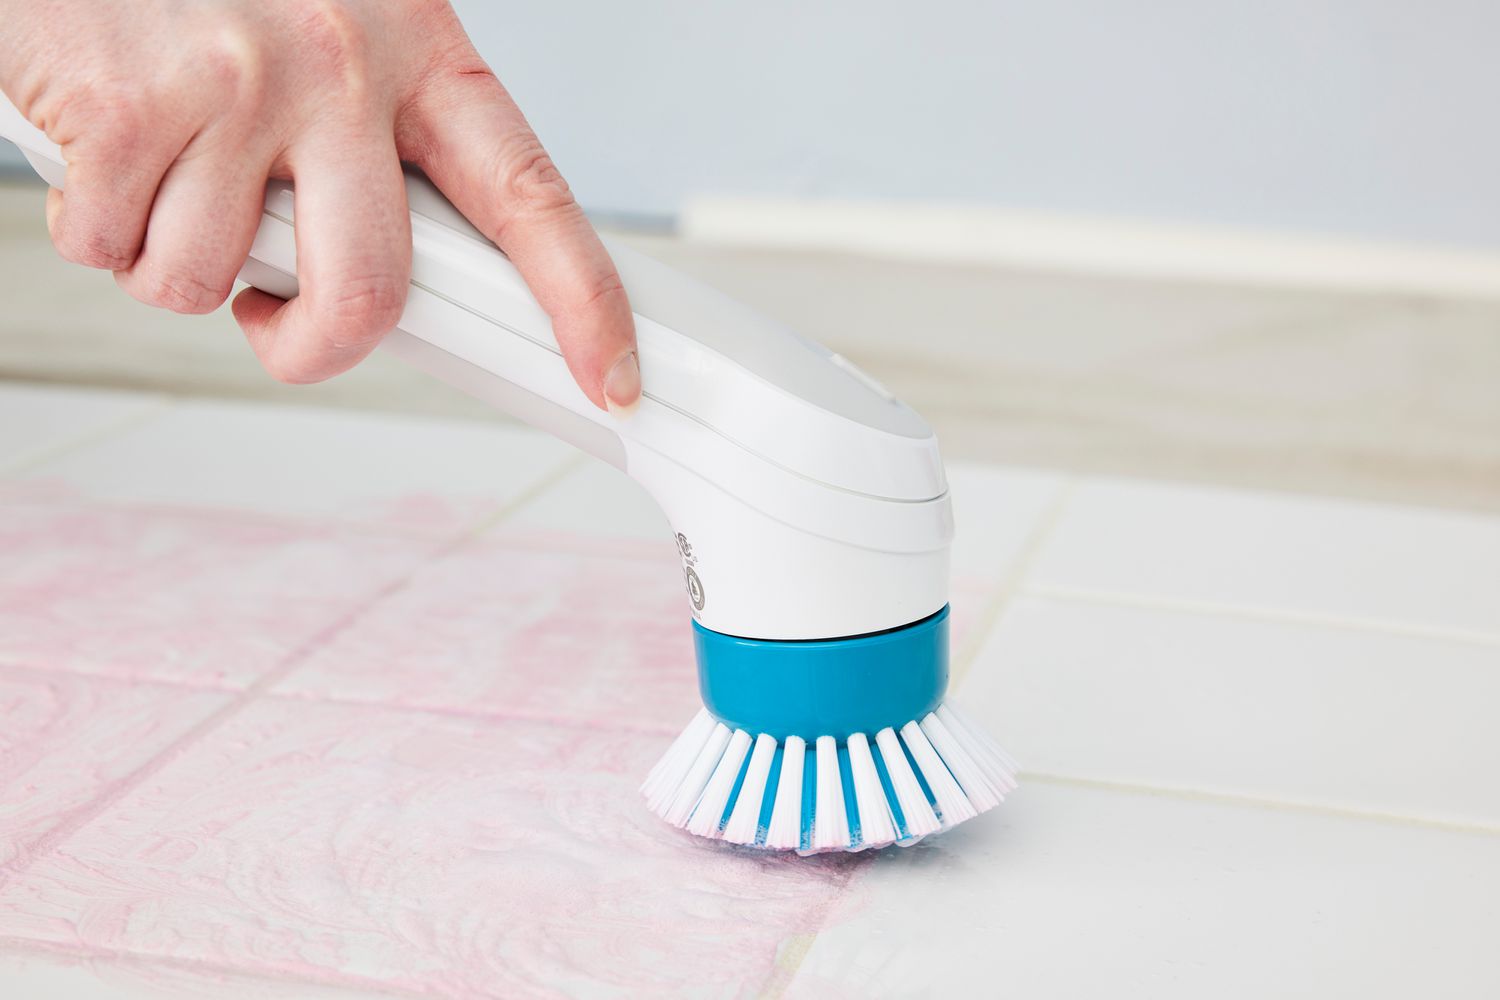 A hand scrubs tile with a Black+Decker Grimebuster Pro Power Scrubber Brush